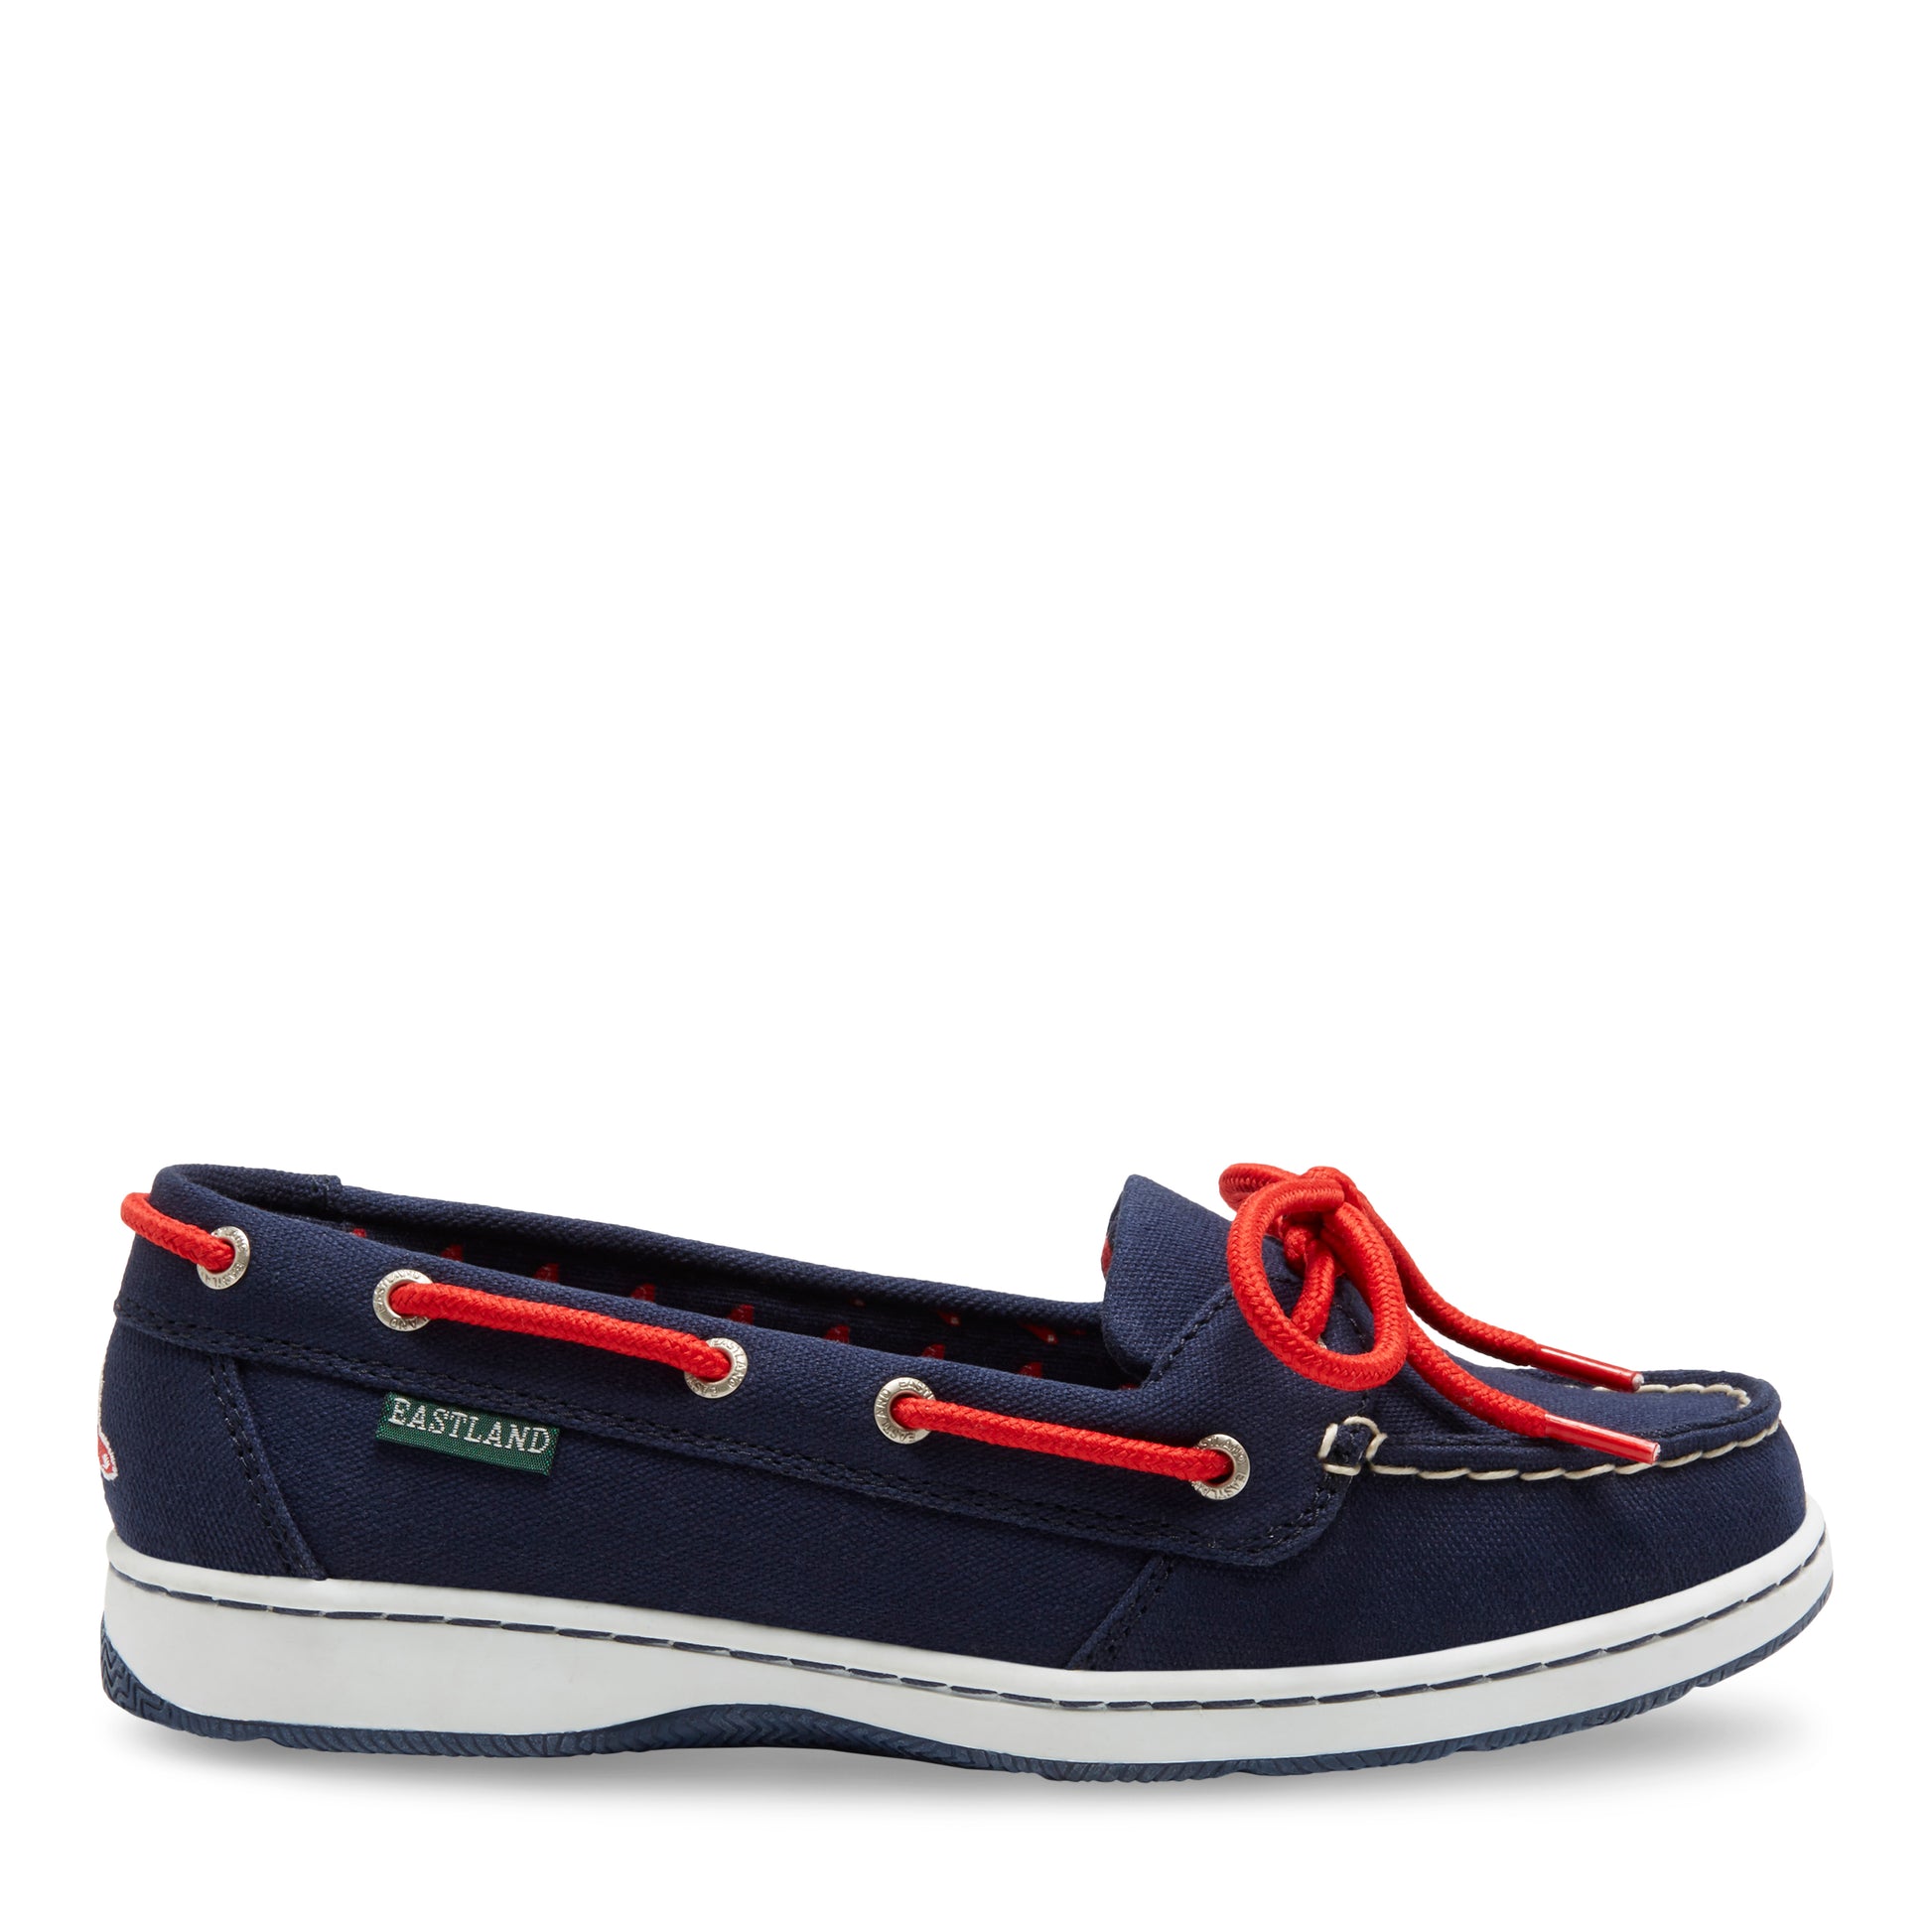 Women's St. Louis Cardinals Eastland Red Sunset Boat Shoes